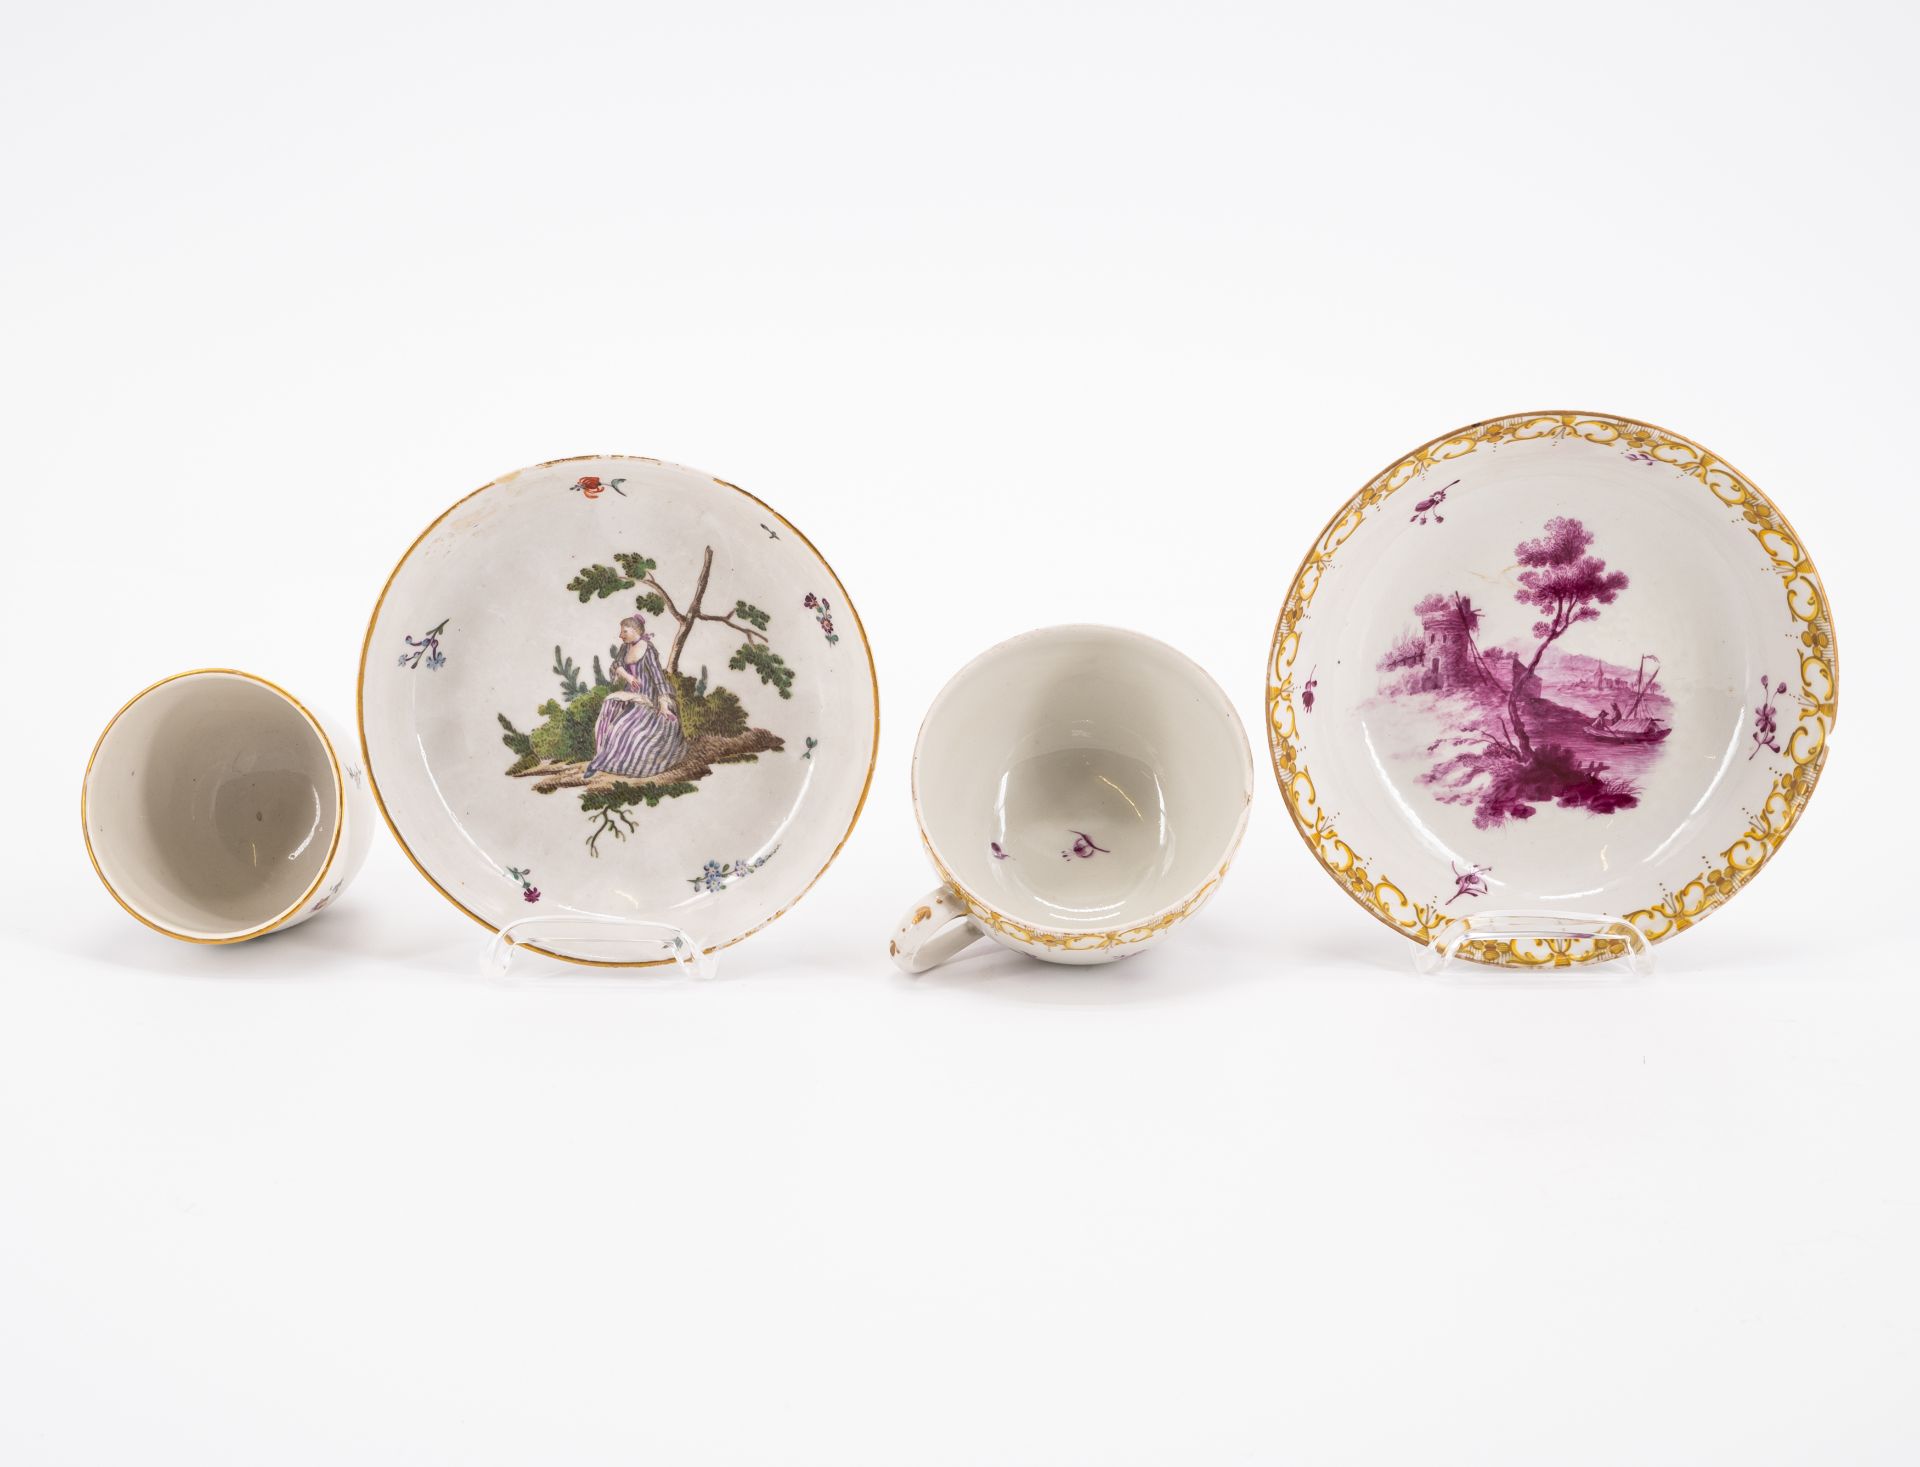 PORCELAIN SLOP BOWL, THREE CUPS AND SAUCERS WITH FIGURATIVE AND FLORAL DECOR - Image 16 of 22